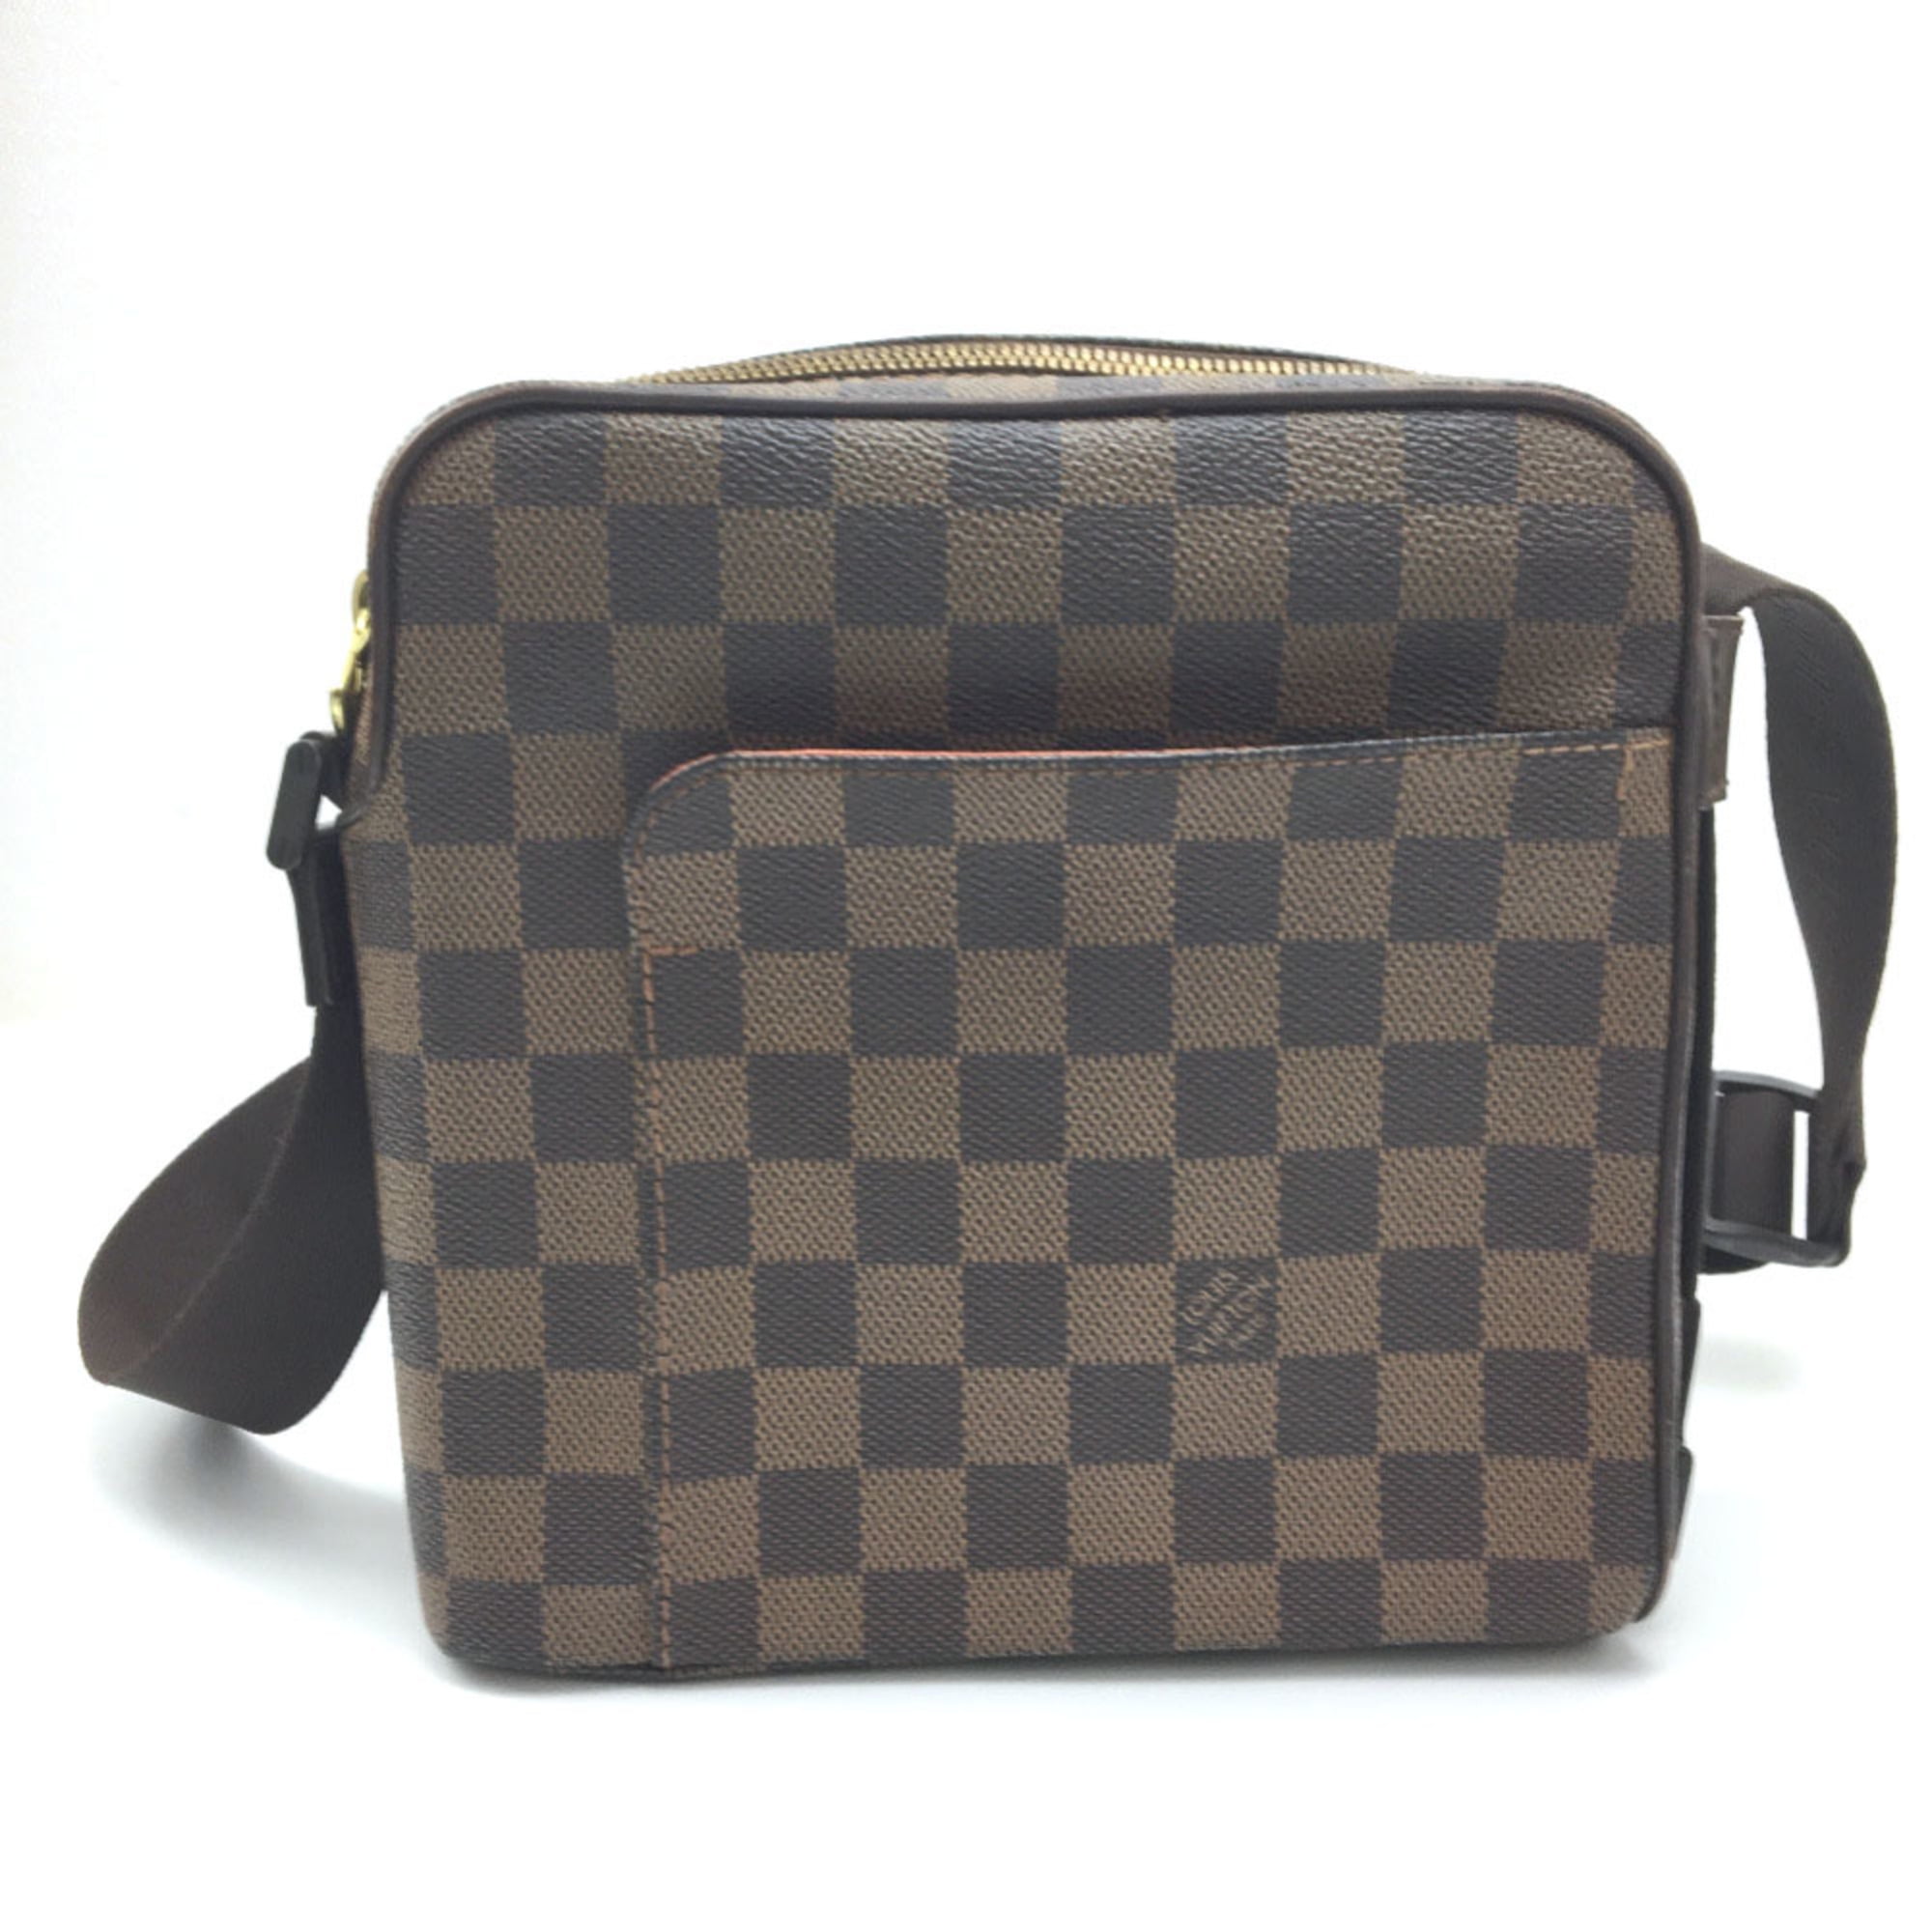 Authenticated Used Louis Vuitton Shoulder Bag Damier Olaf PM N41442 ...